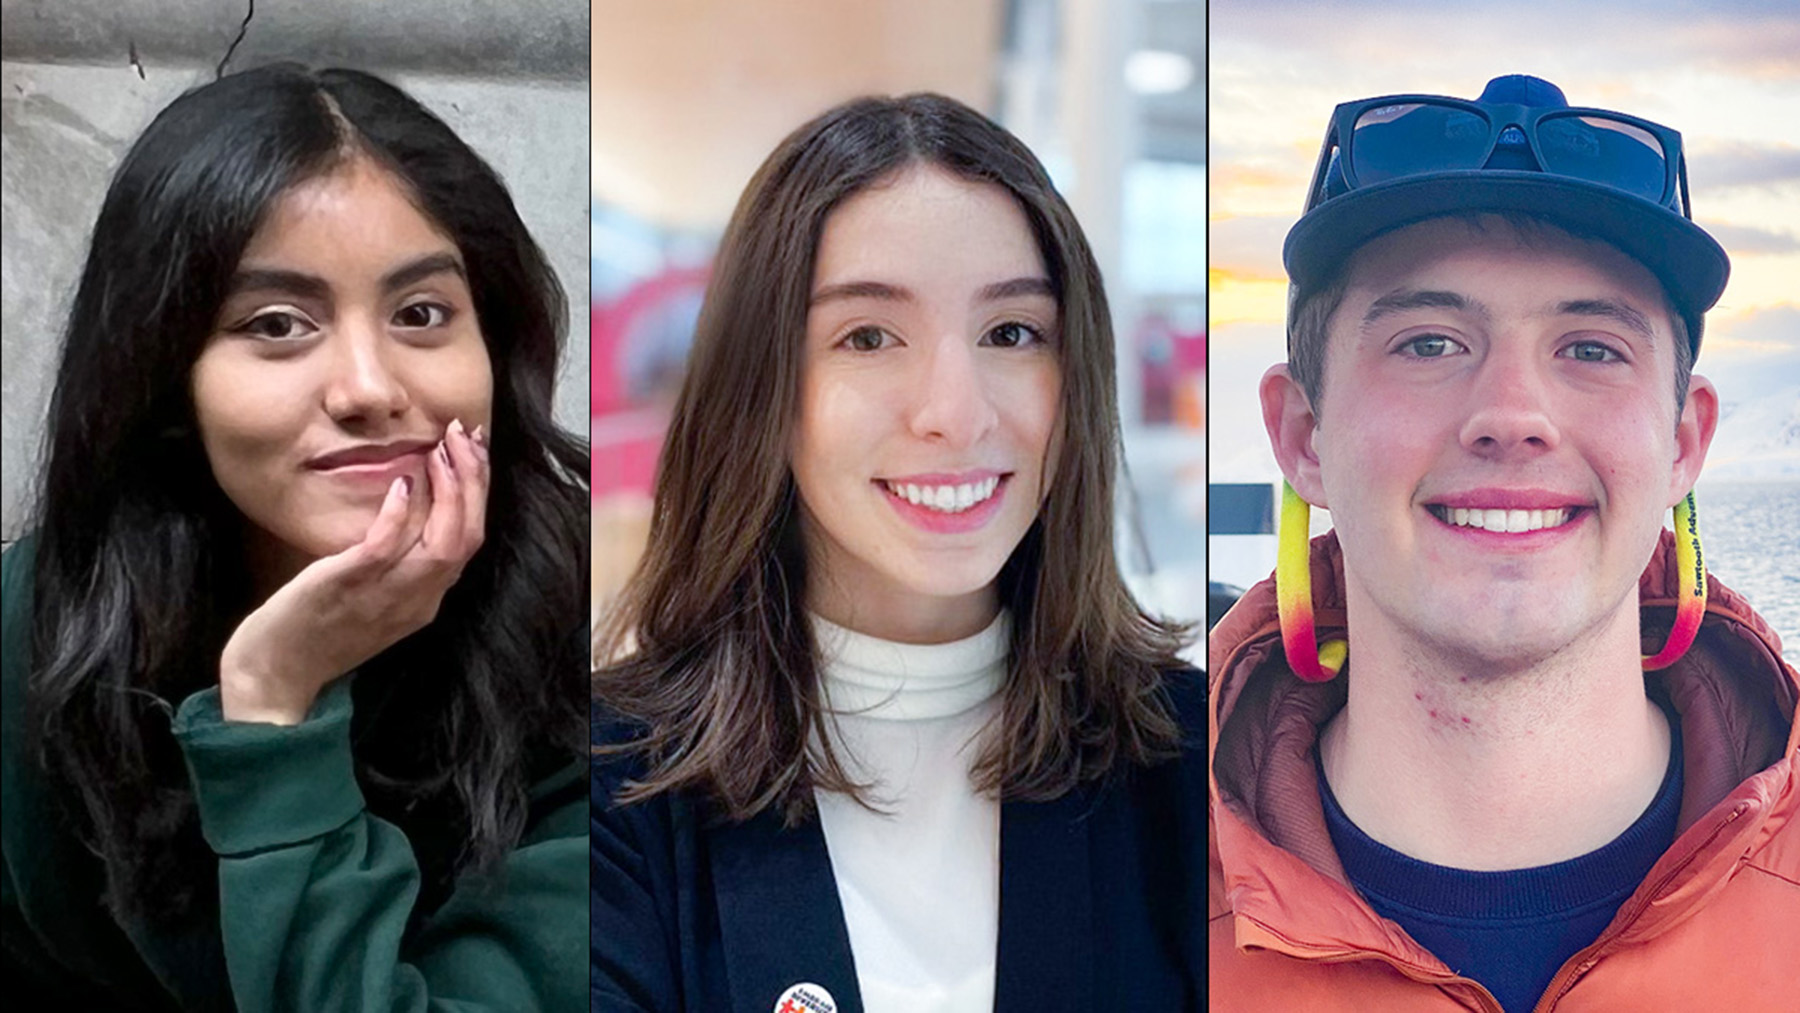 University of Illinois students, from left, Jacqueline Becerra, Aynur Namik and Robert Herbolich received U.S. Department of State Critical Language Scholarships to study foreign languages this summer.